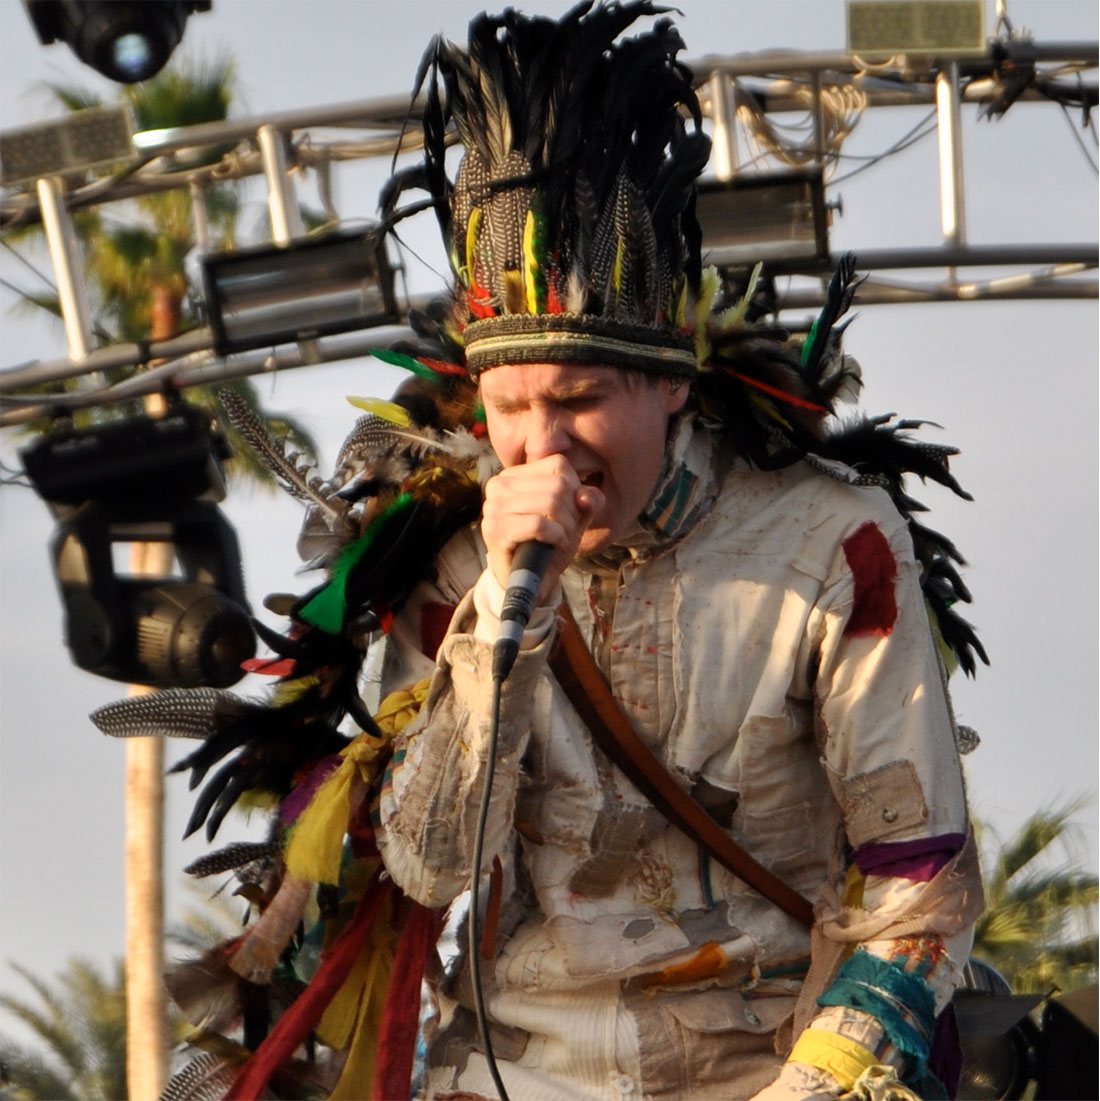 A photograph of singer Jonsi performing at Coachella in what appears to be Native American headdress.